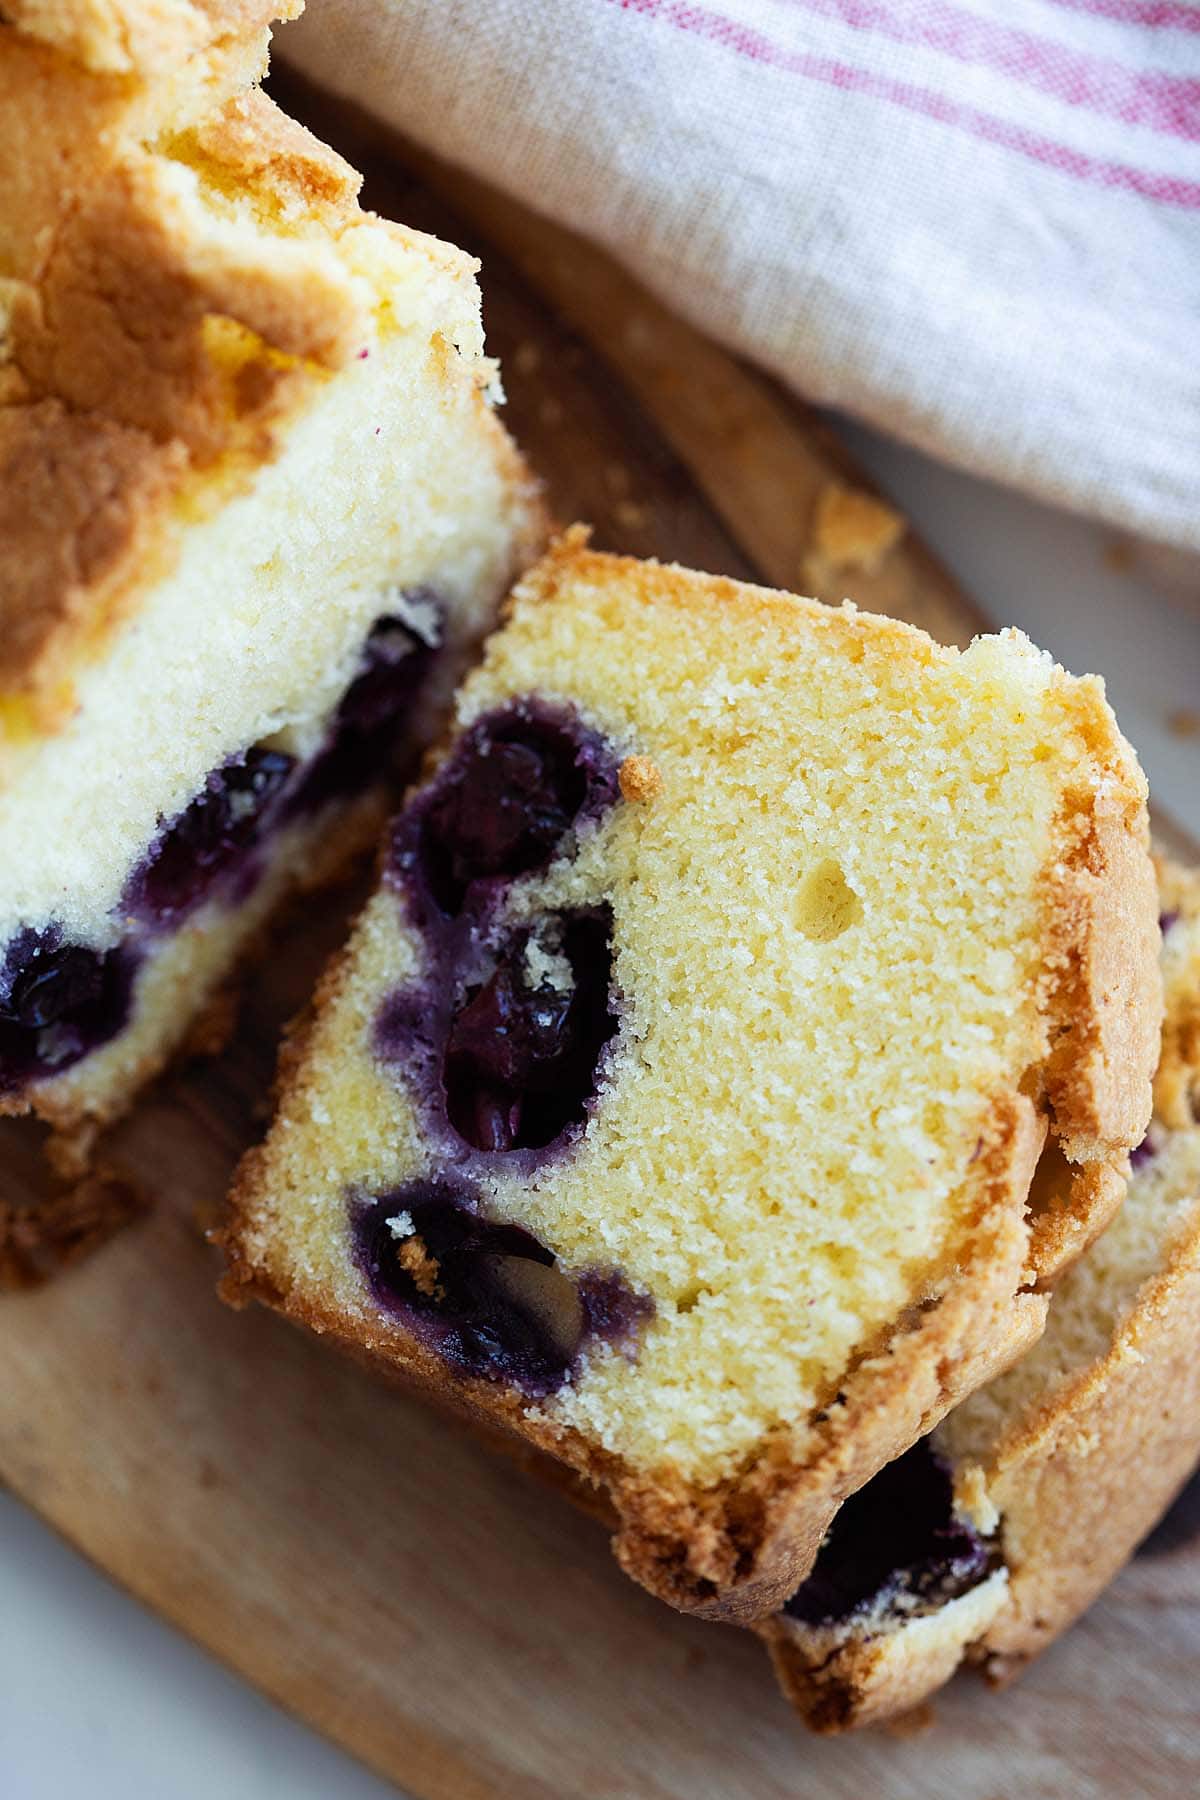 Cake with golden-brown crust and abundant of juicy blueberries in between the yellow cake. 